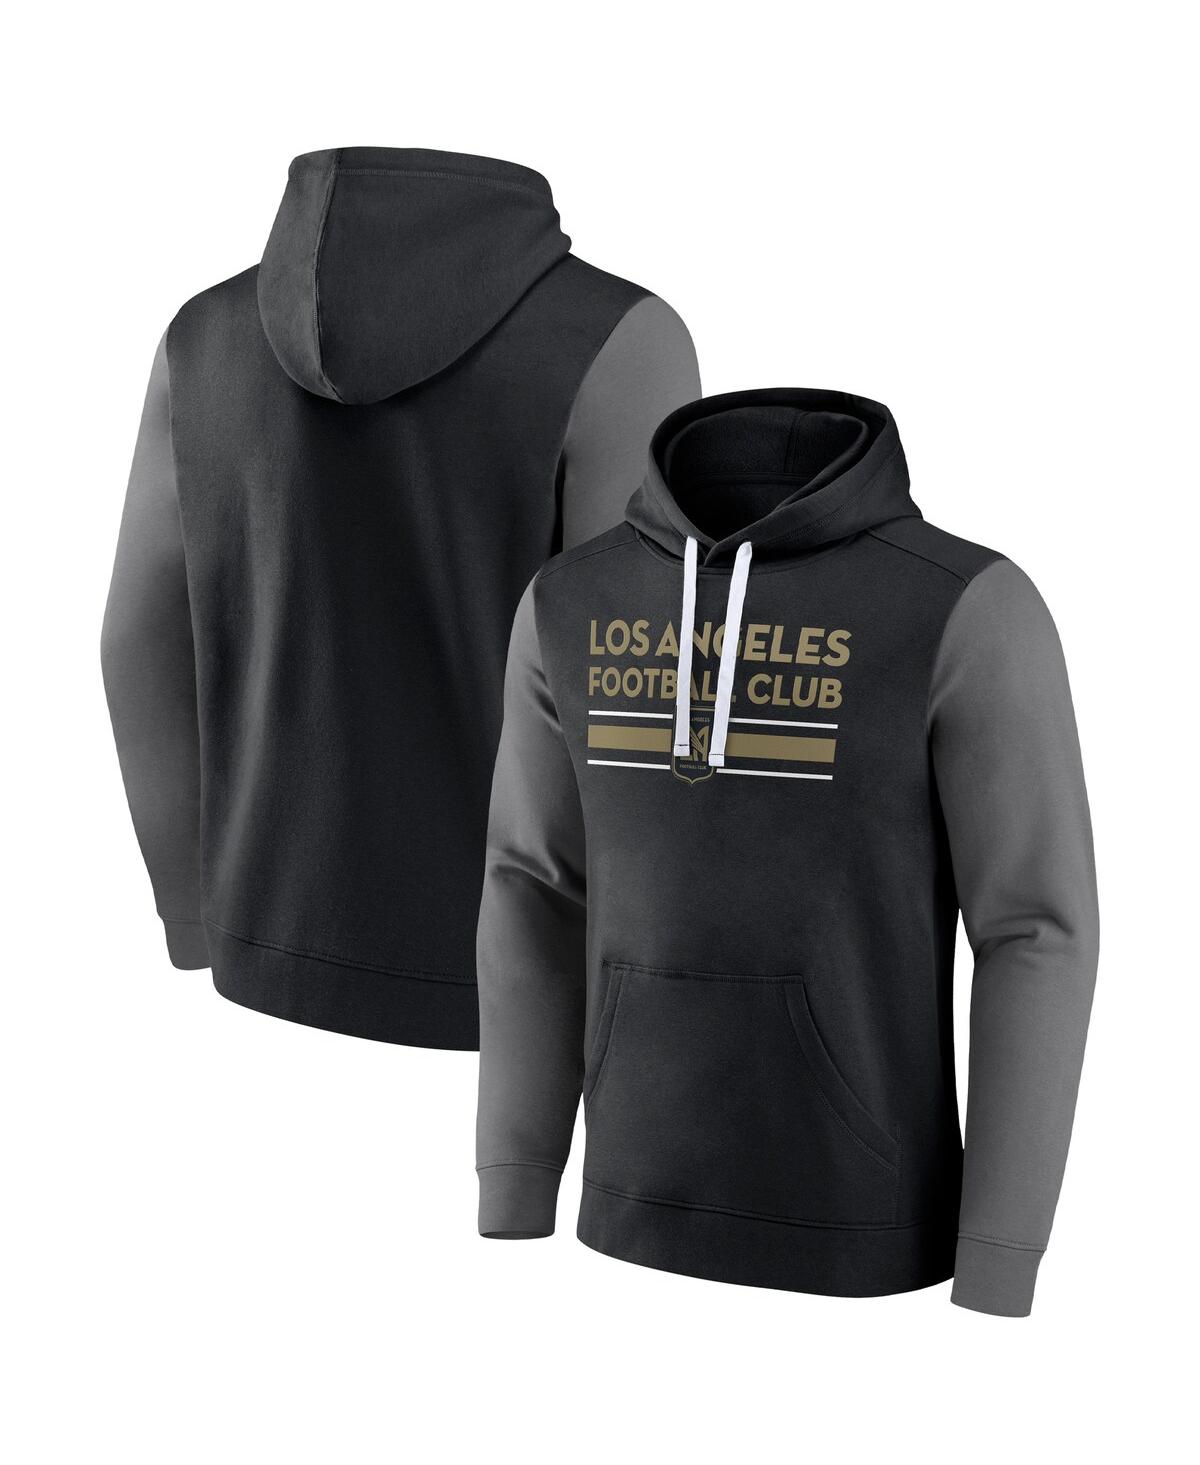 Fanatics Branded Black Lafc To Victory Pullover Hoodie